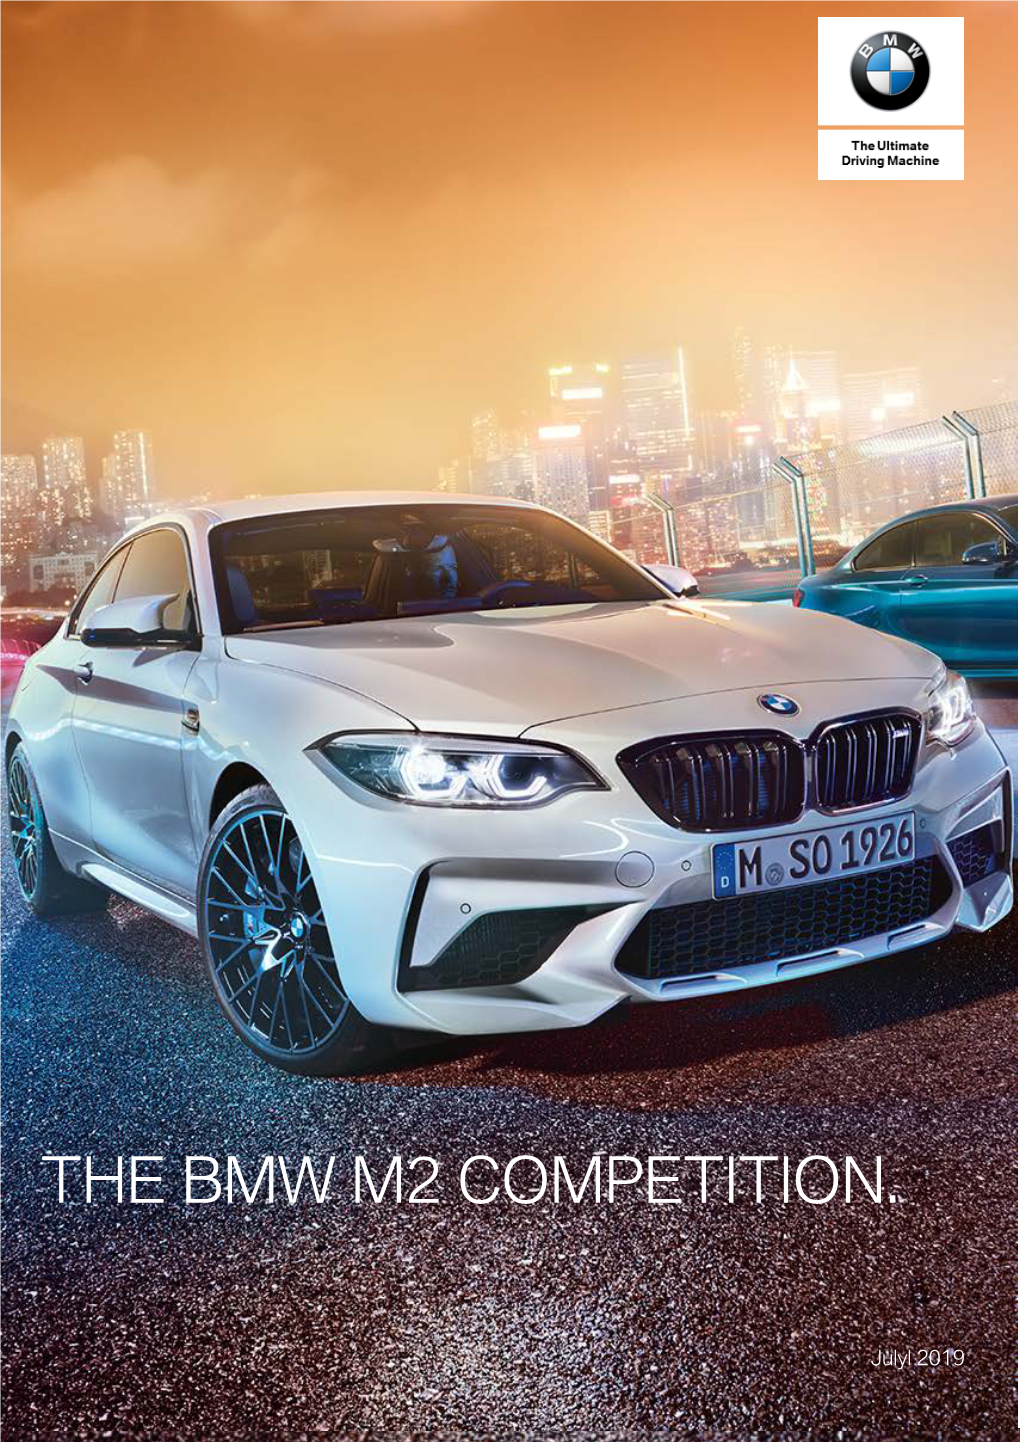 The Bmw M2 Competition